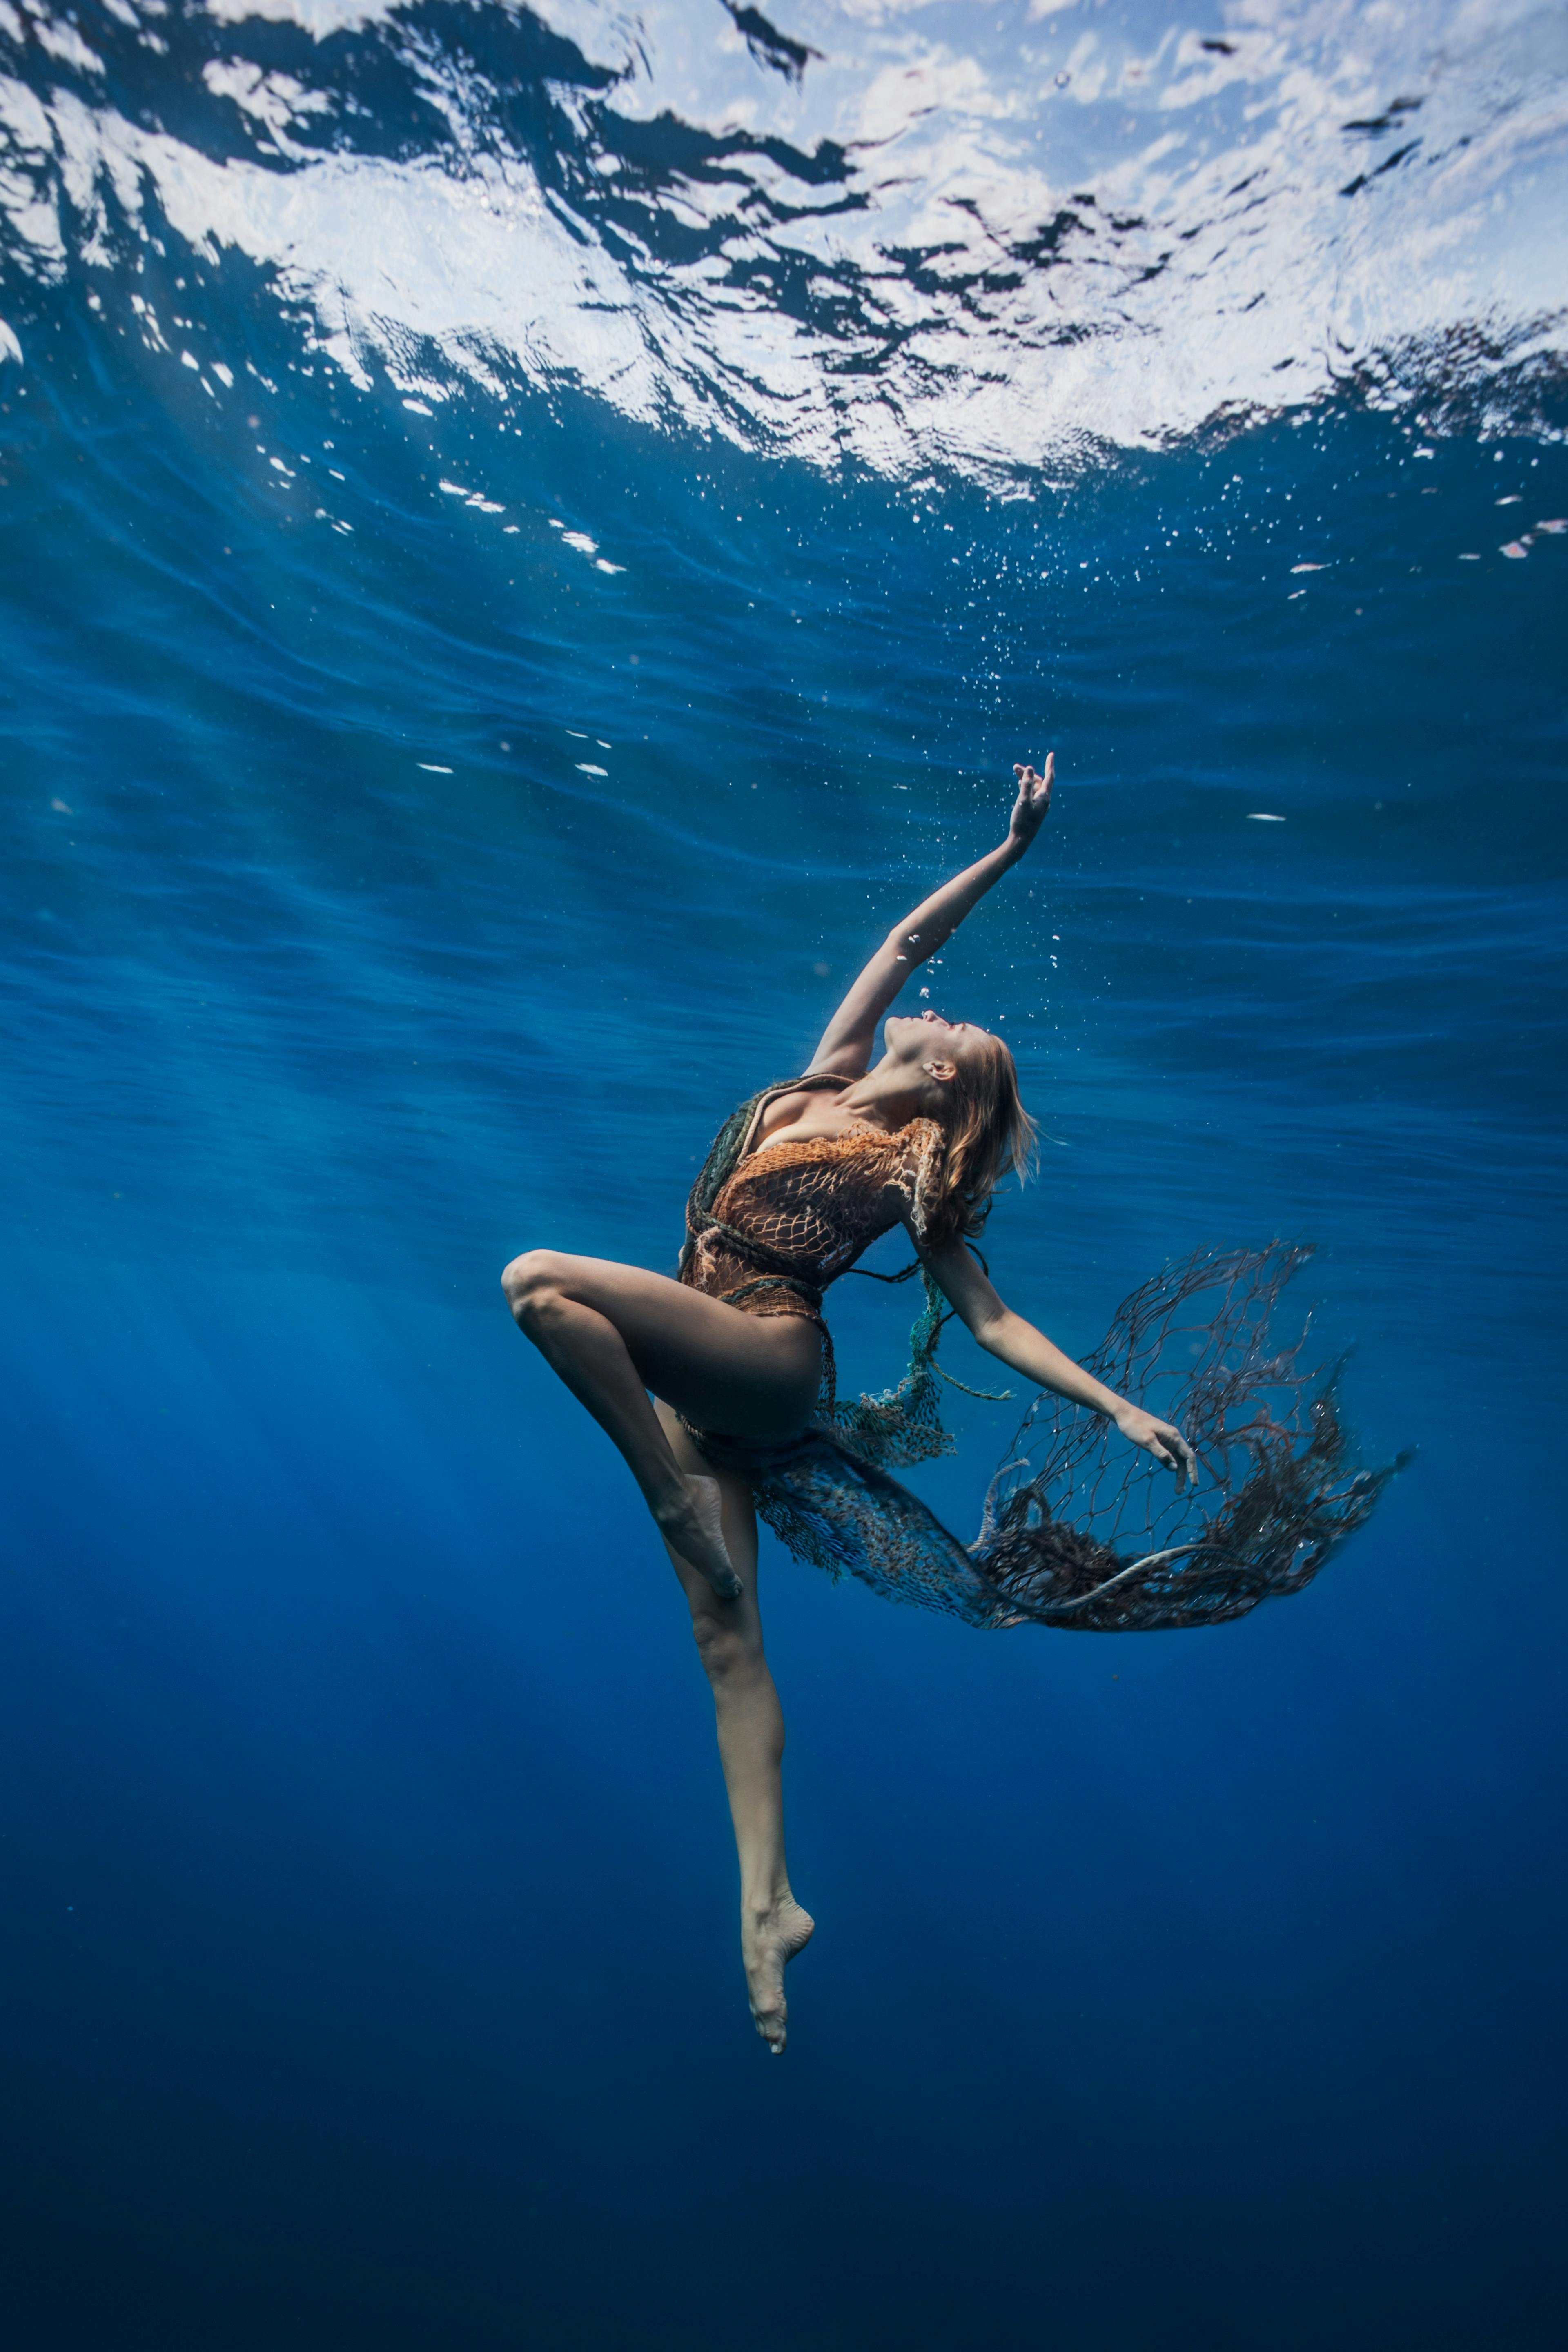 "Ascension is a photograph taken during the making of “Oceans Apart,” a short dance film by filmmaker Audrey Billups (pictured)."